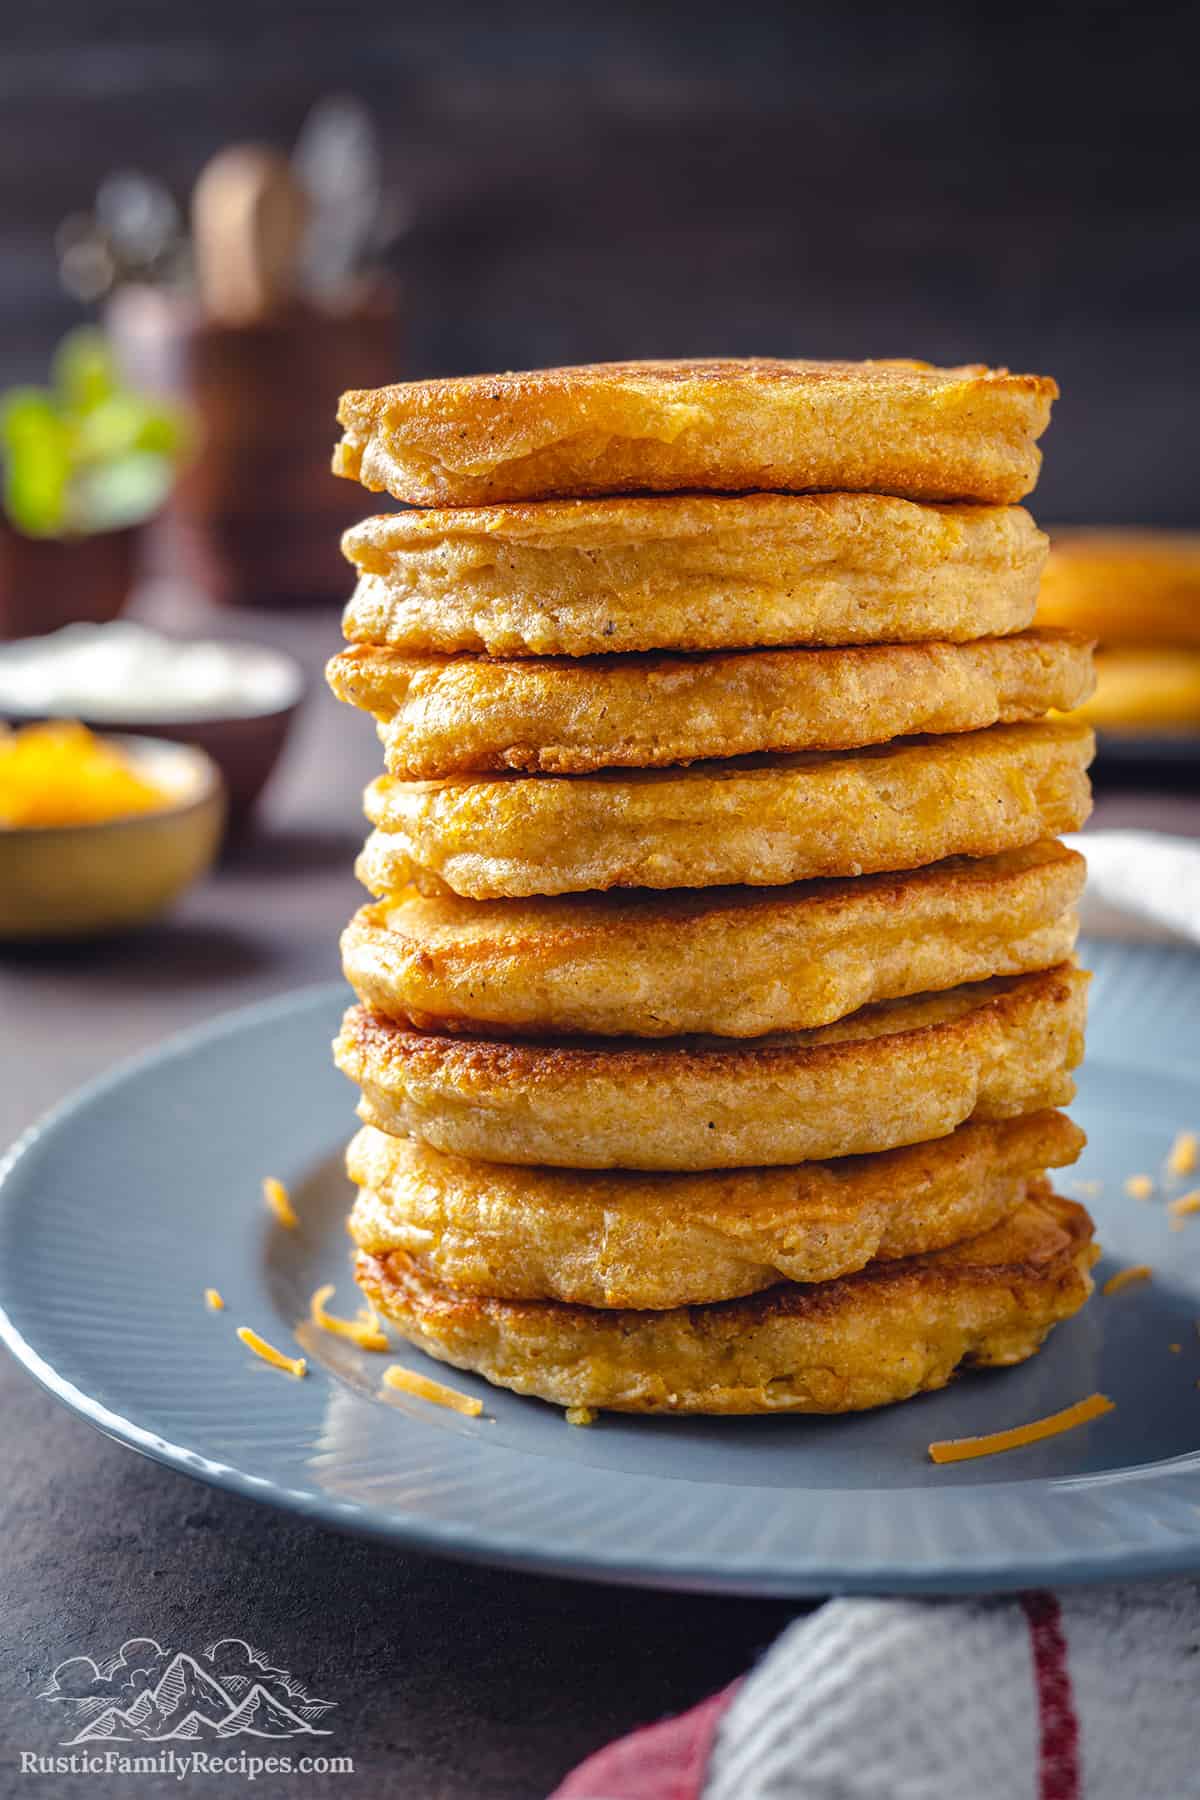 A stack of six golden hot cakes on a blue plate